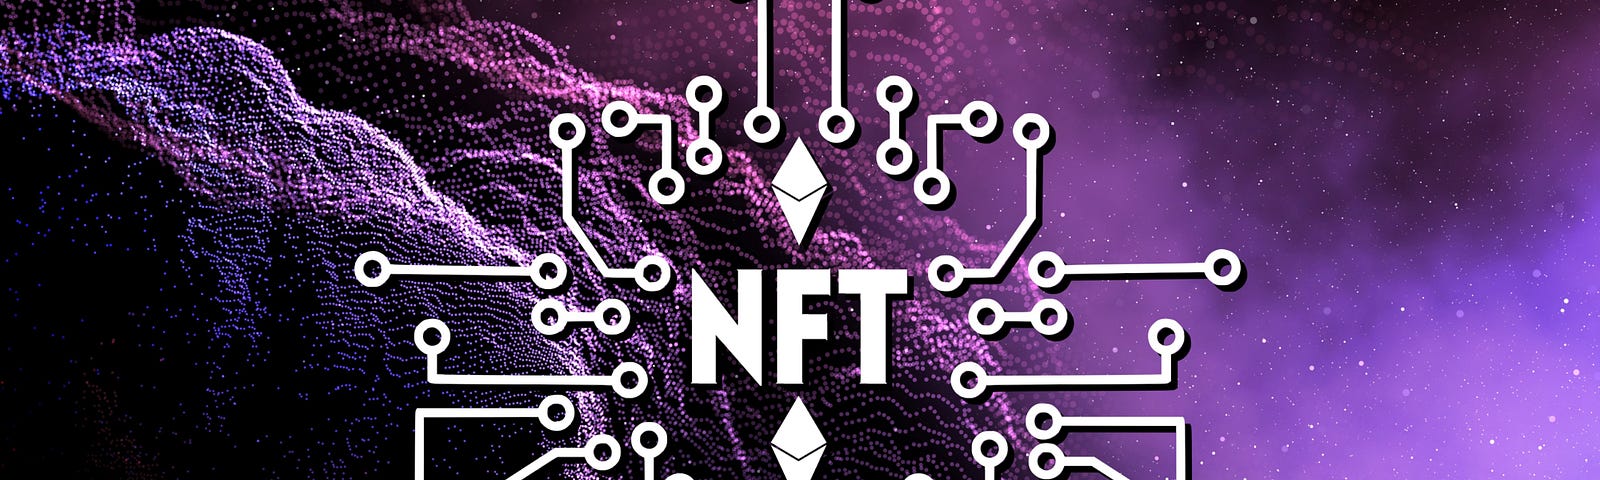 A predominantly purple and violet color scheme, with varying gradients and shades creating depth and visual interest. The image has a strong central focus due to the large, bold “NFT” text and the Ethereum logo above and below it. A digital artwork that represents the concept of NFTs (Non-Fungible Tokens).